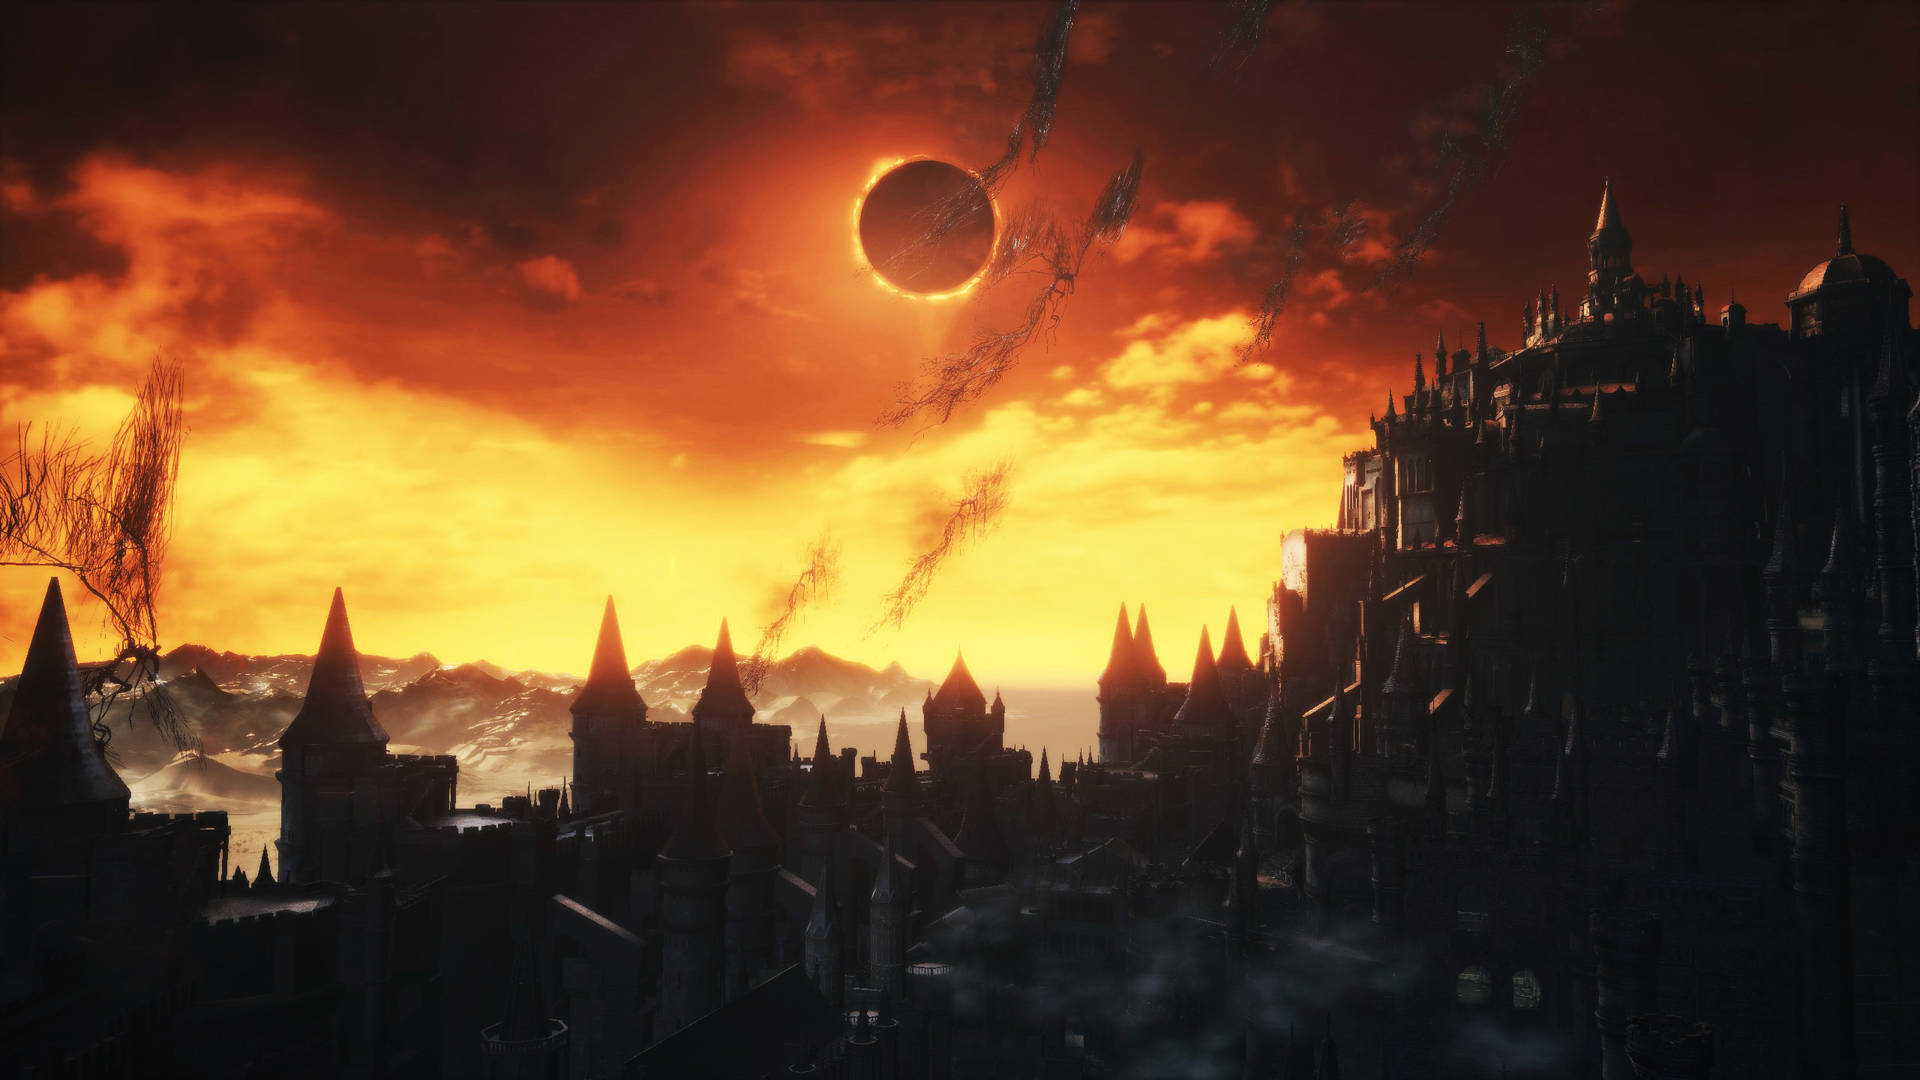 Solar Eclipse Over Fantasy Town Background